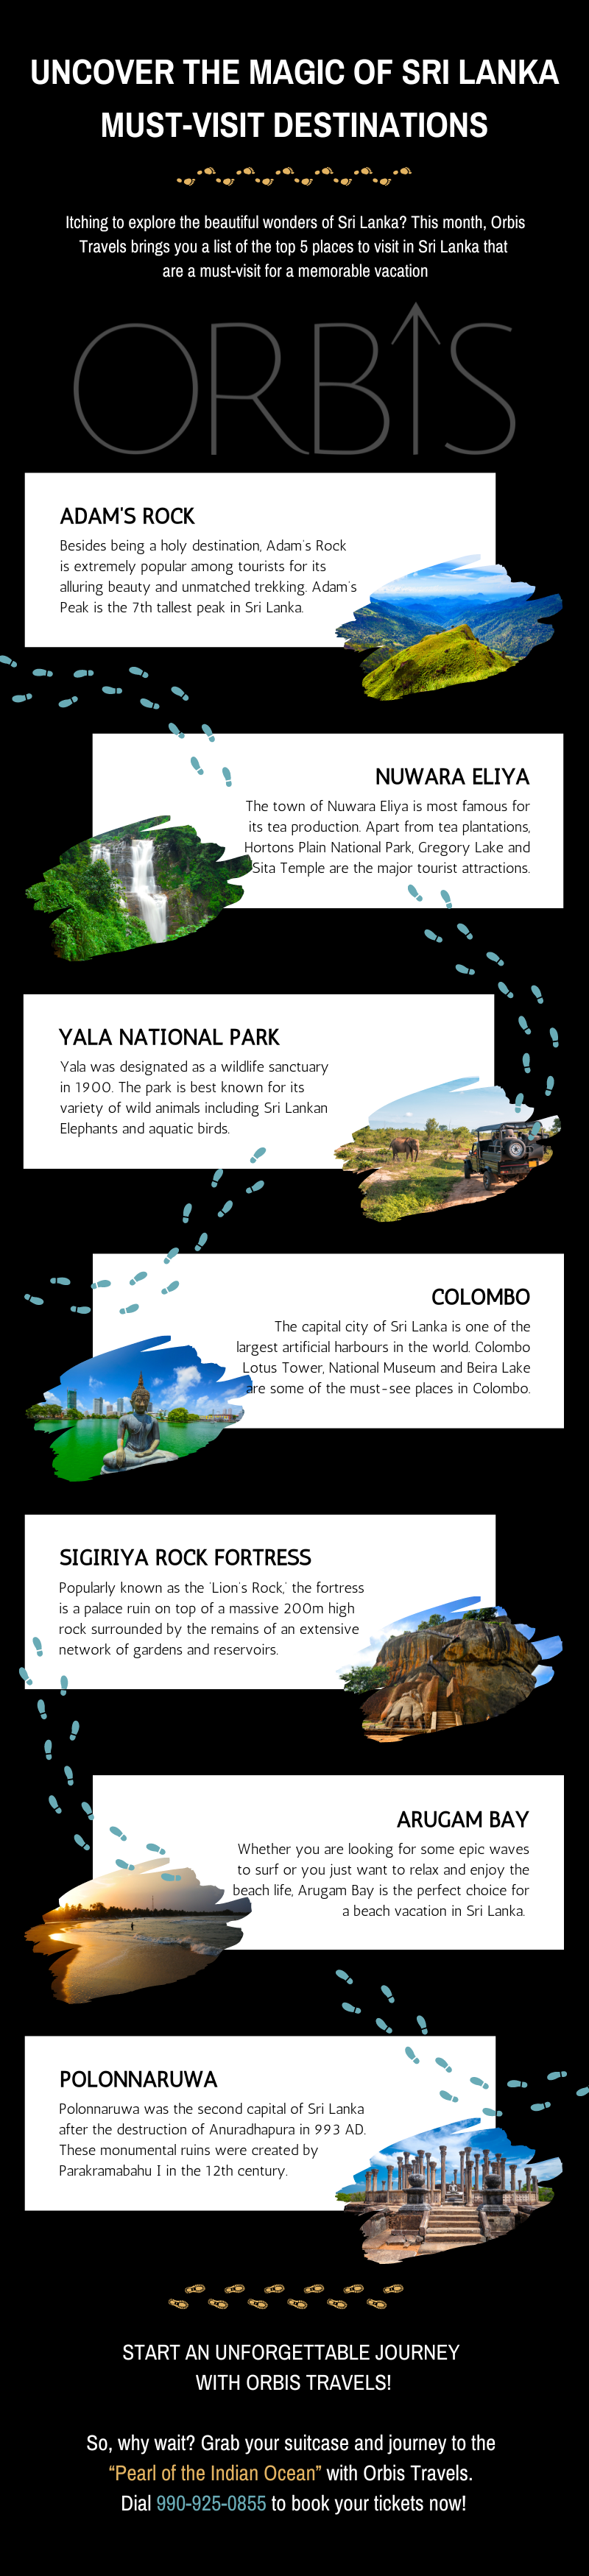 a detailed infographic on must visit places in Sri Lanka